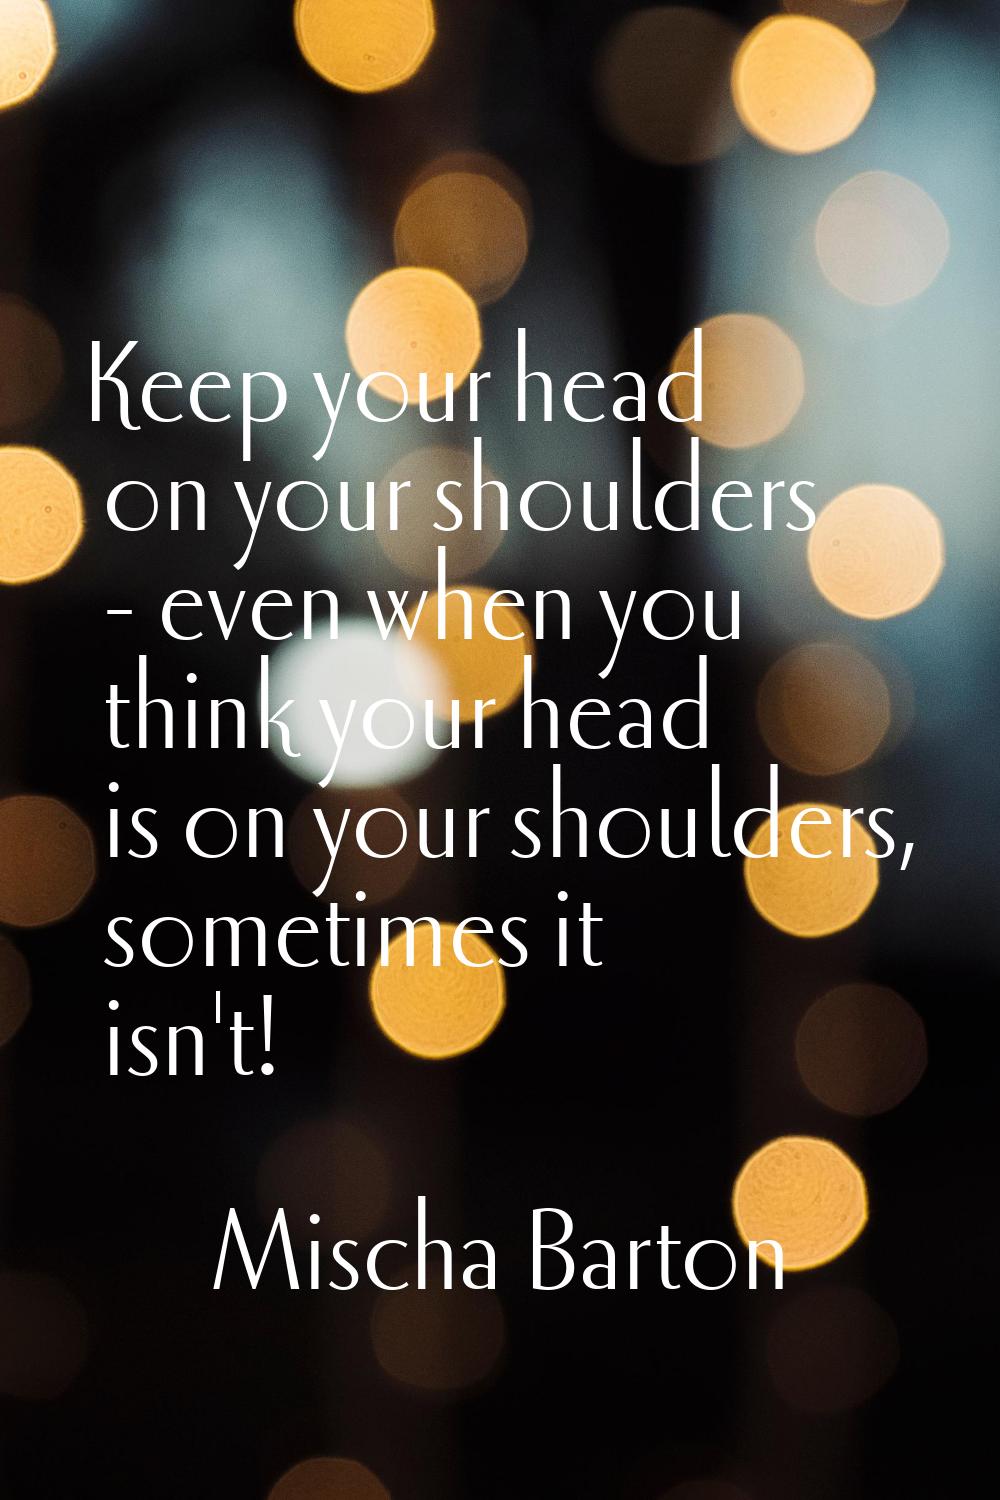 Keep your head on your shoulders - even when you think your head is on your shoulders, sometimes it